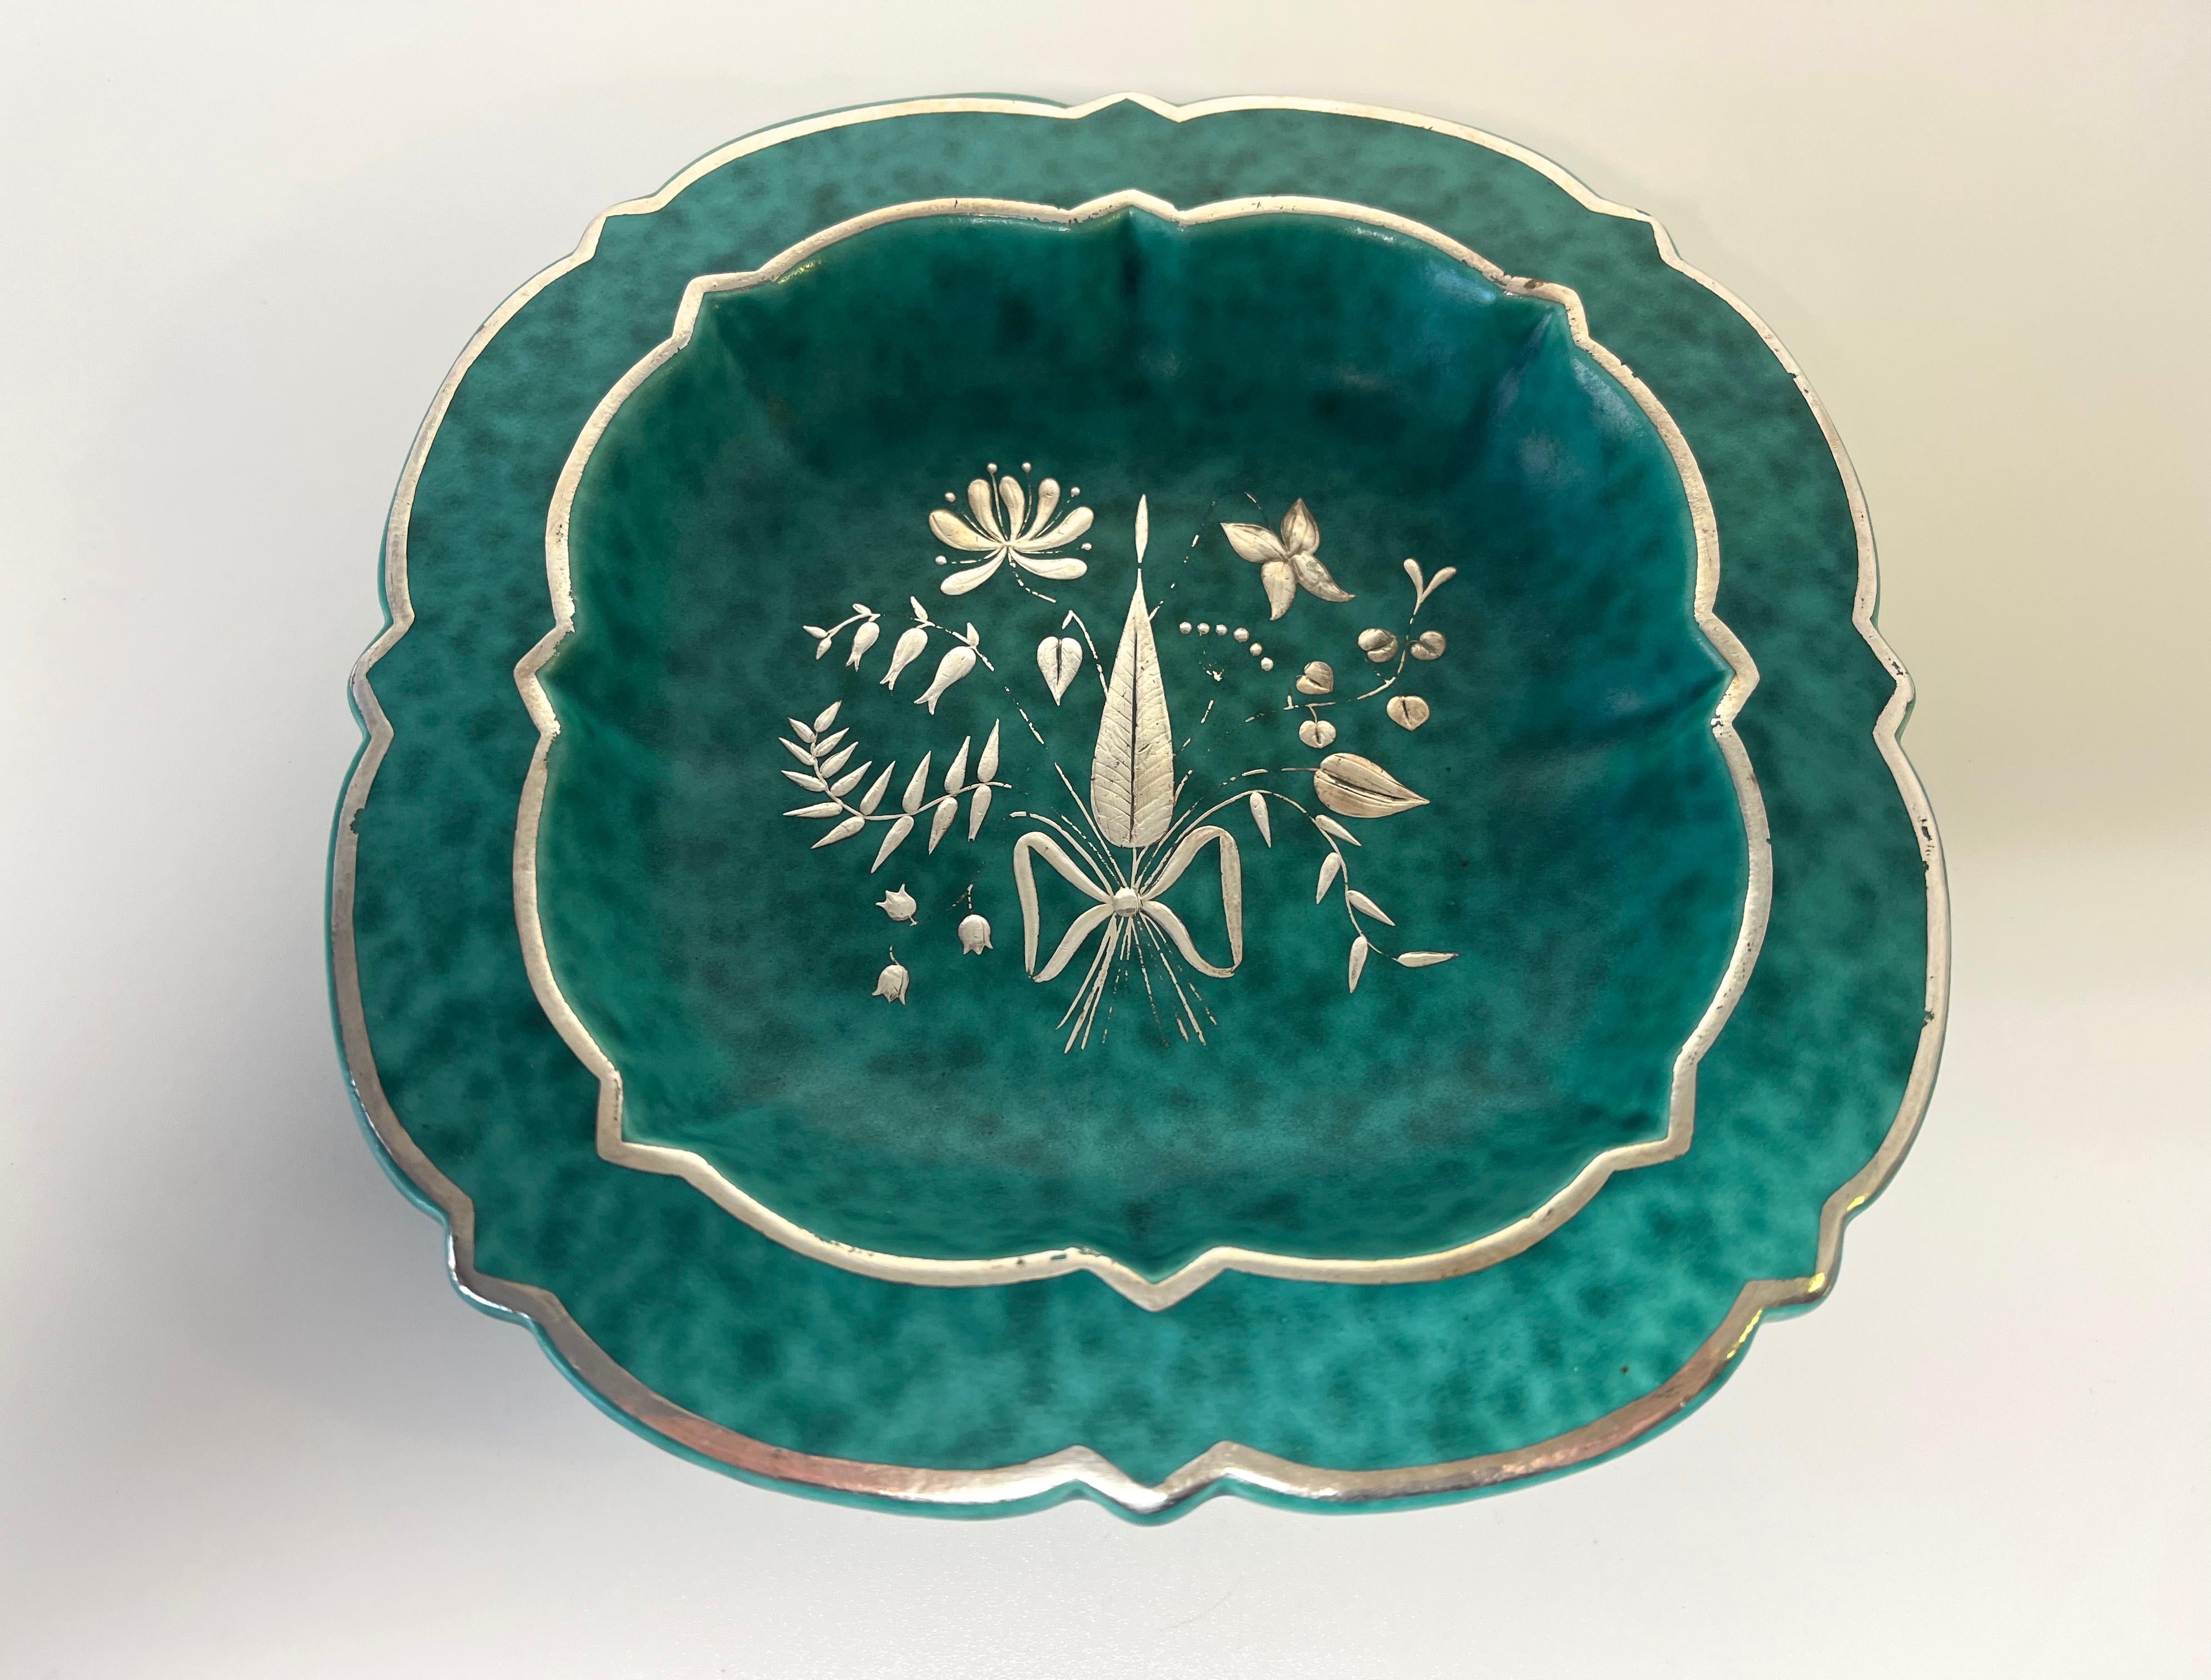 A beautiful square shaped mottled green stoneware dish with delicately applied silver flora decoration
Designed by Wilhelm Kage for the Argenta series for Gustavsberg, Sweden
Circa 1940
Signed to base Gustavsberg Argenta 1120 in silver